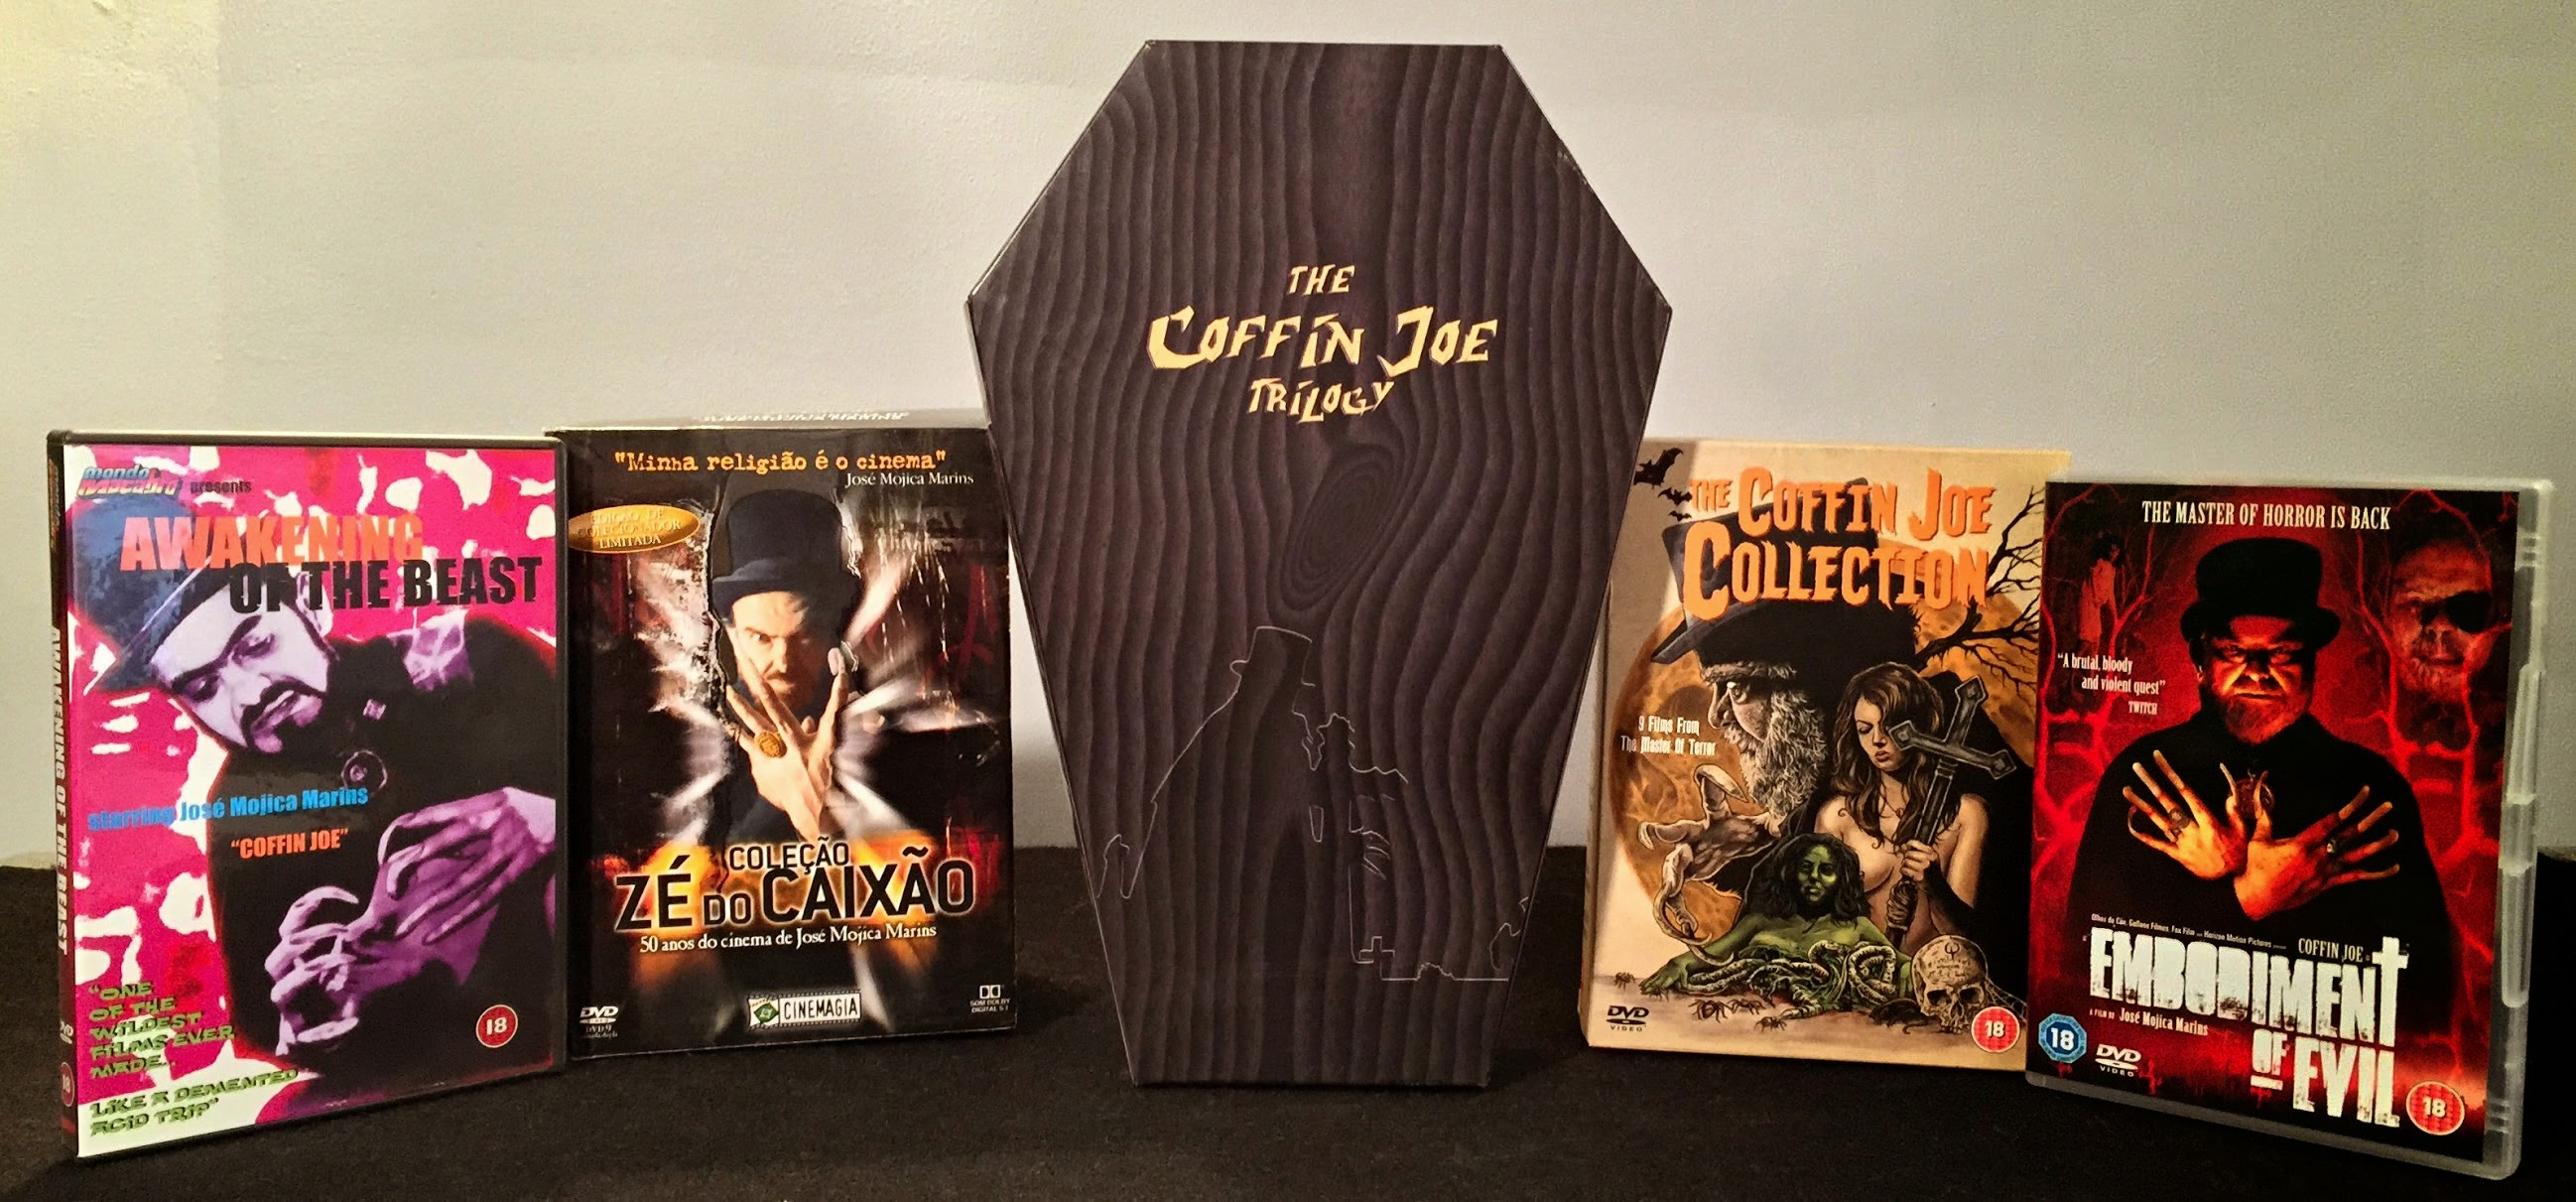 DVD Exotica The Strange Oeuvre of Coffin Joe, Part 1 picture